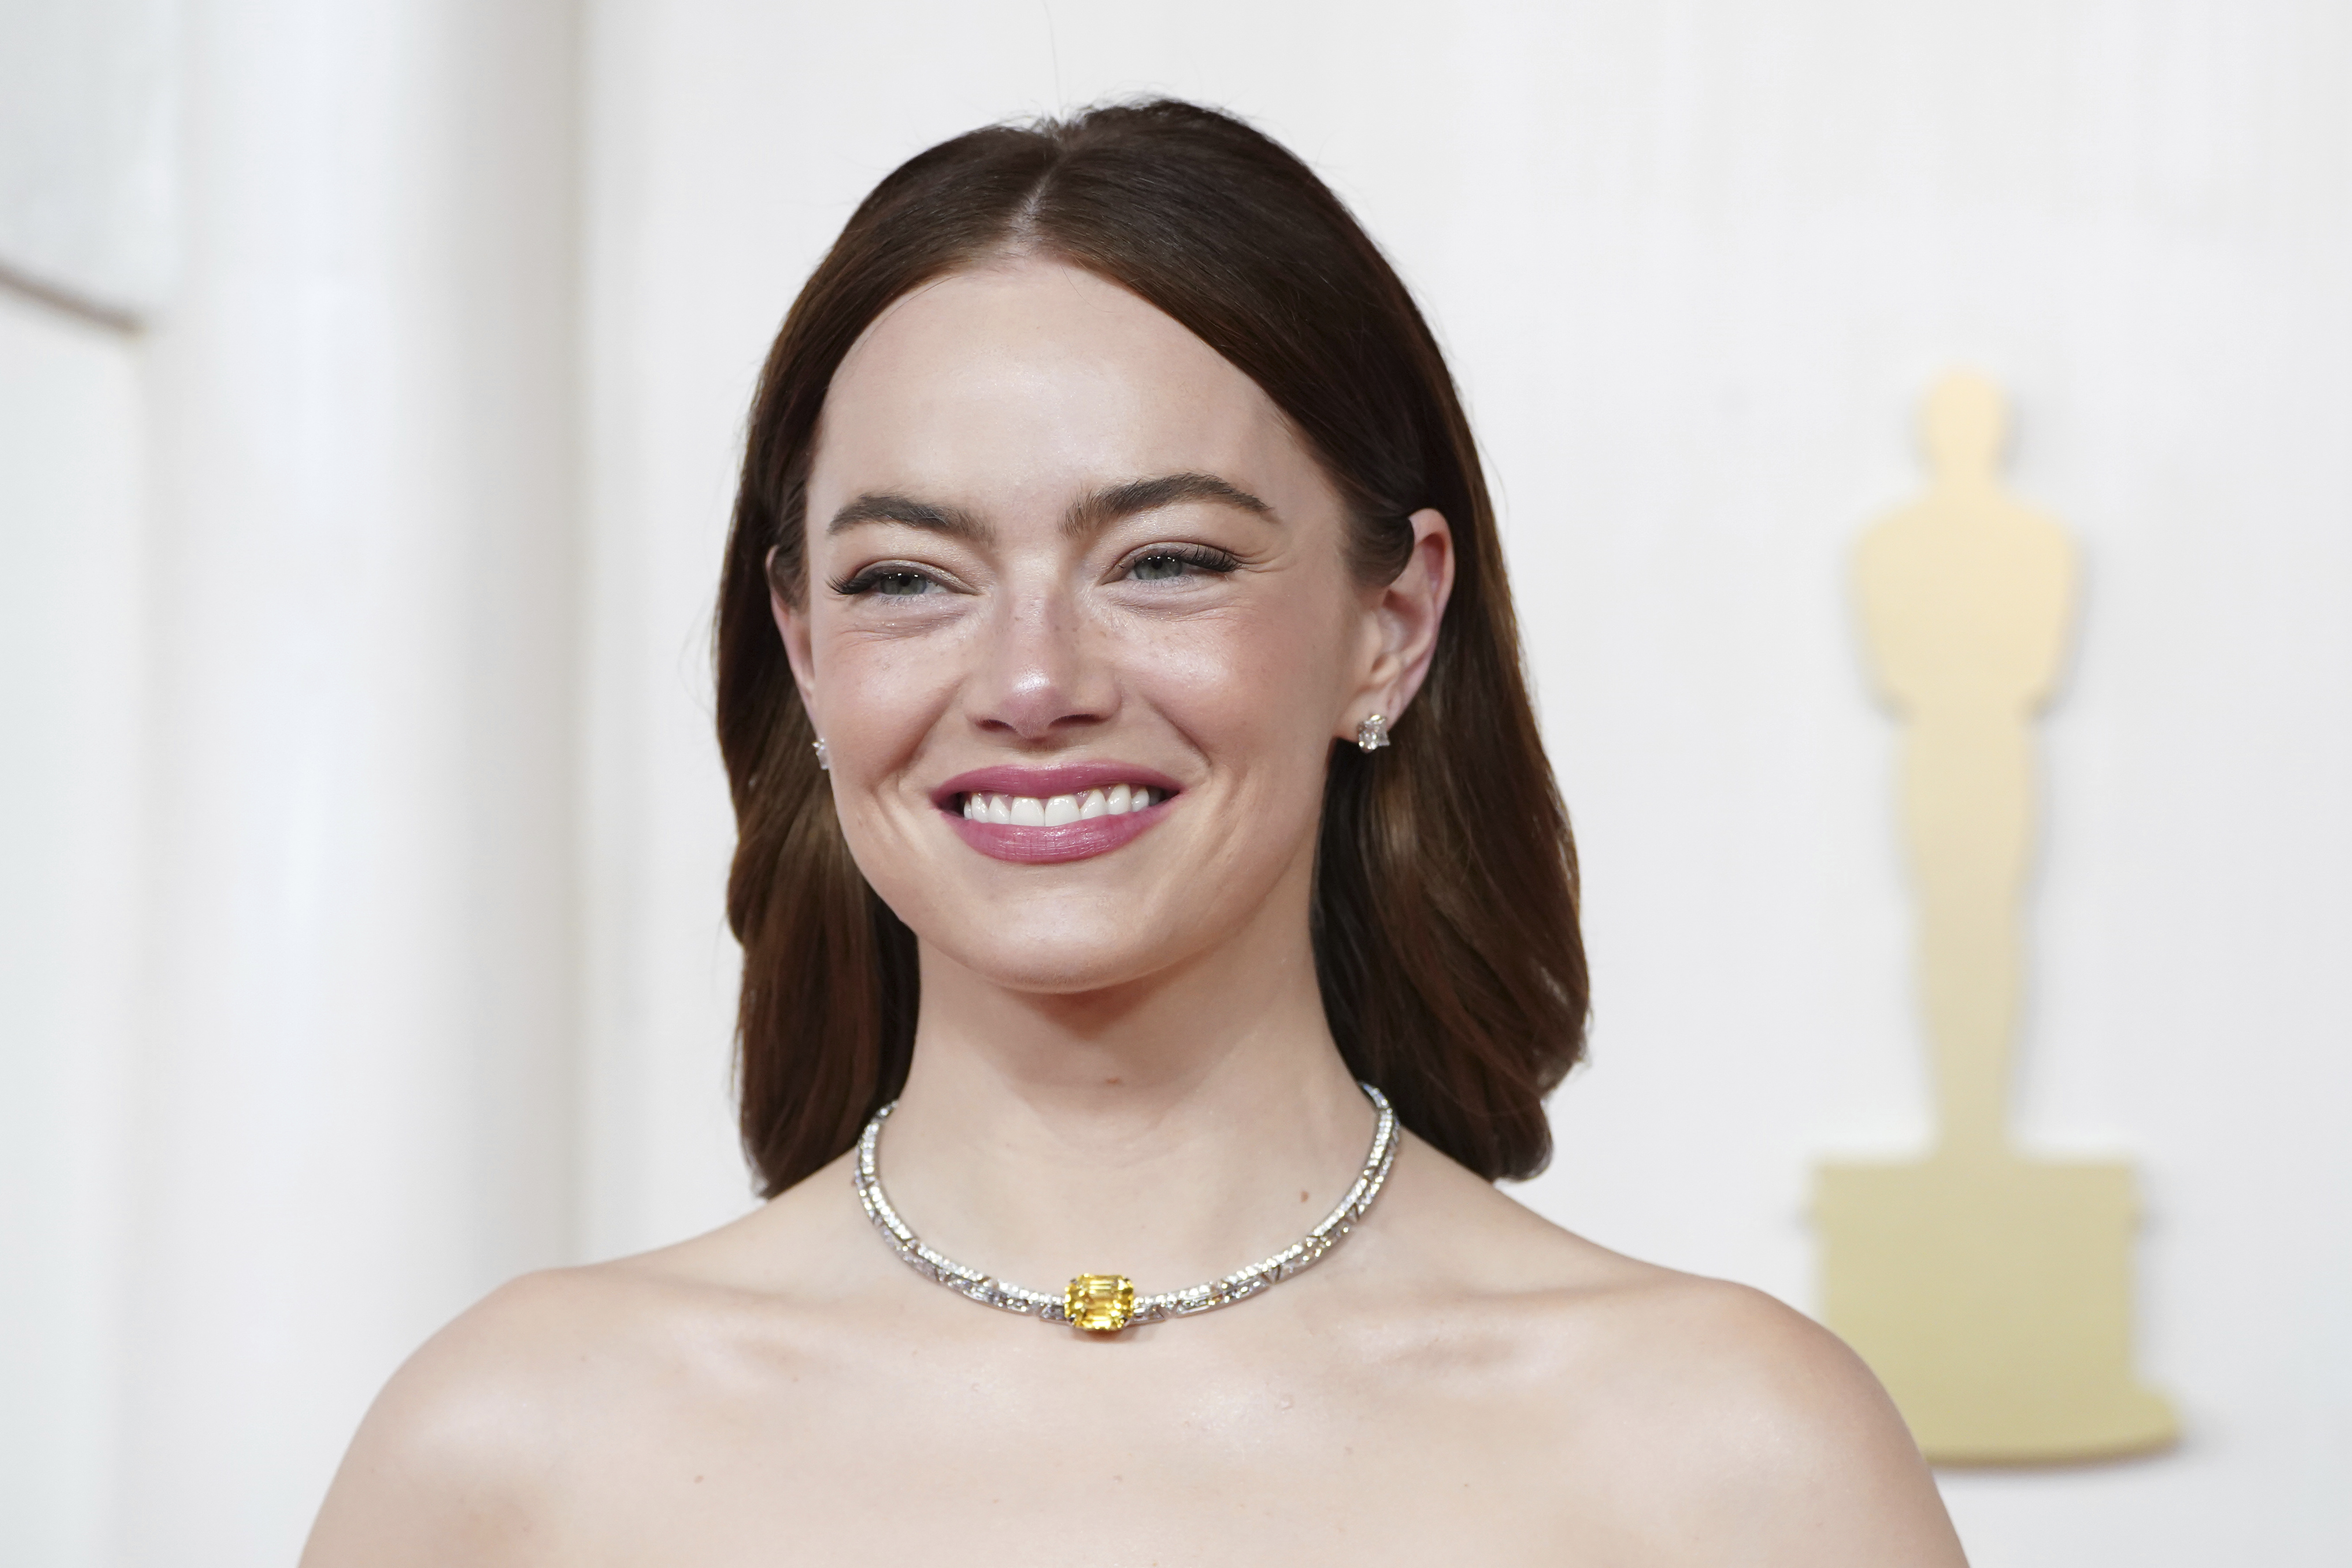 emma stone best actress world stunning actress pretty queen images free hd download